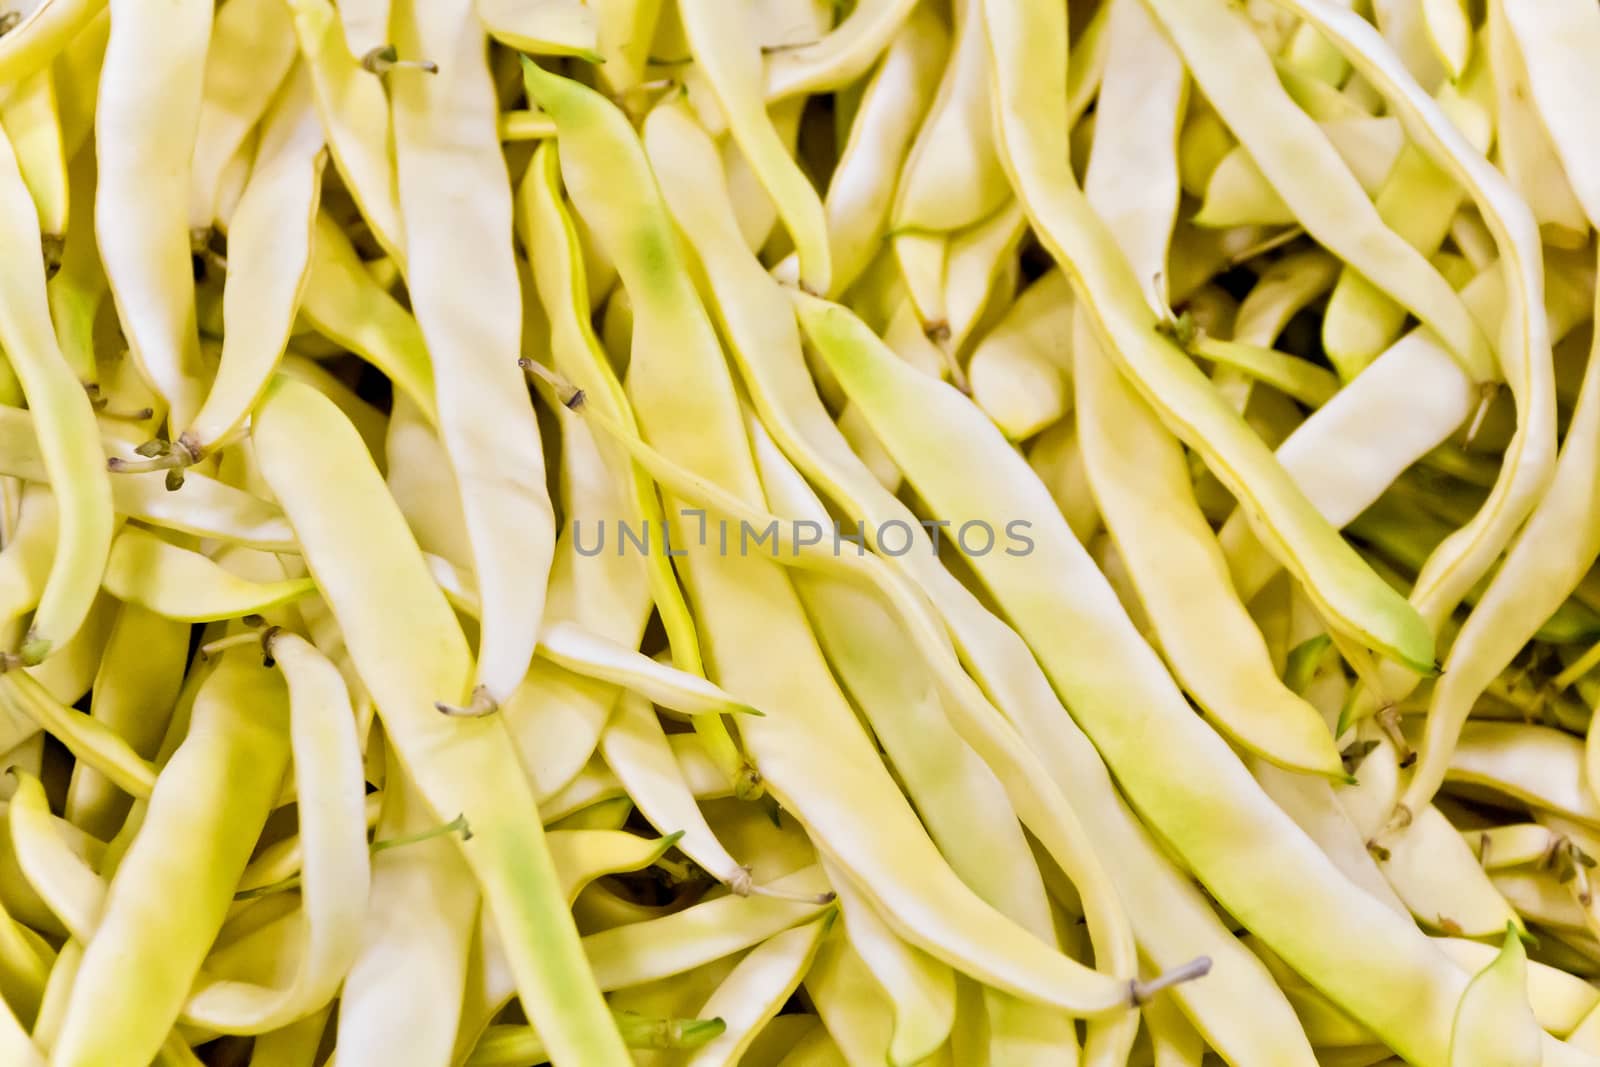 Background of yellow pods kidney beans on counter in market place